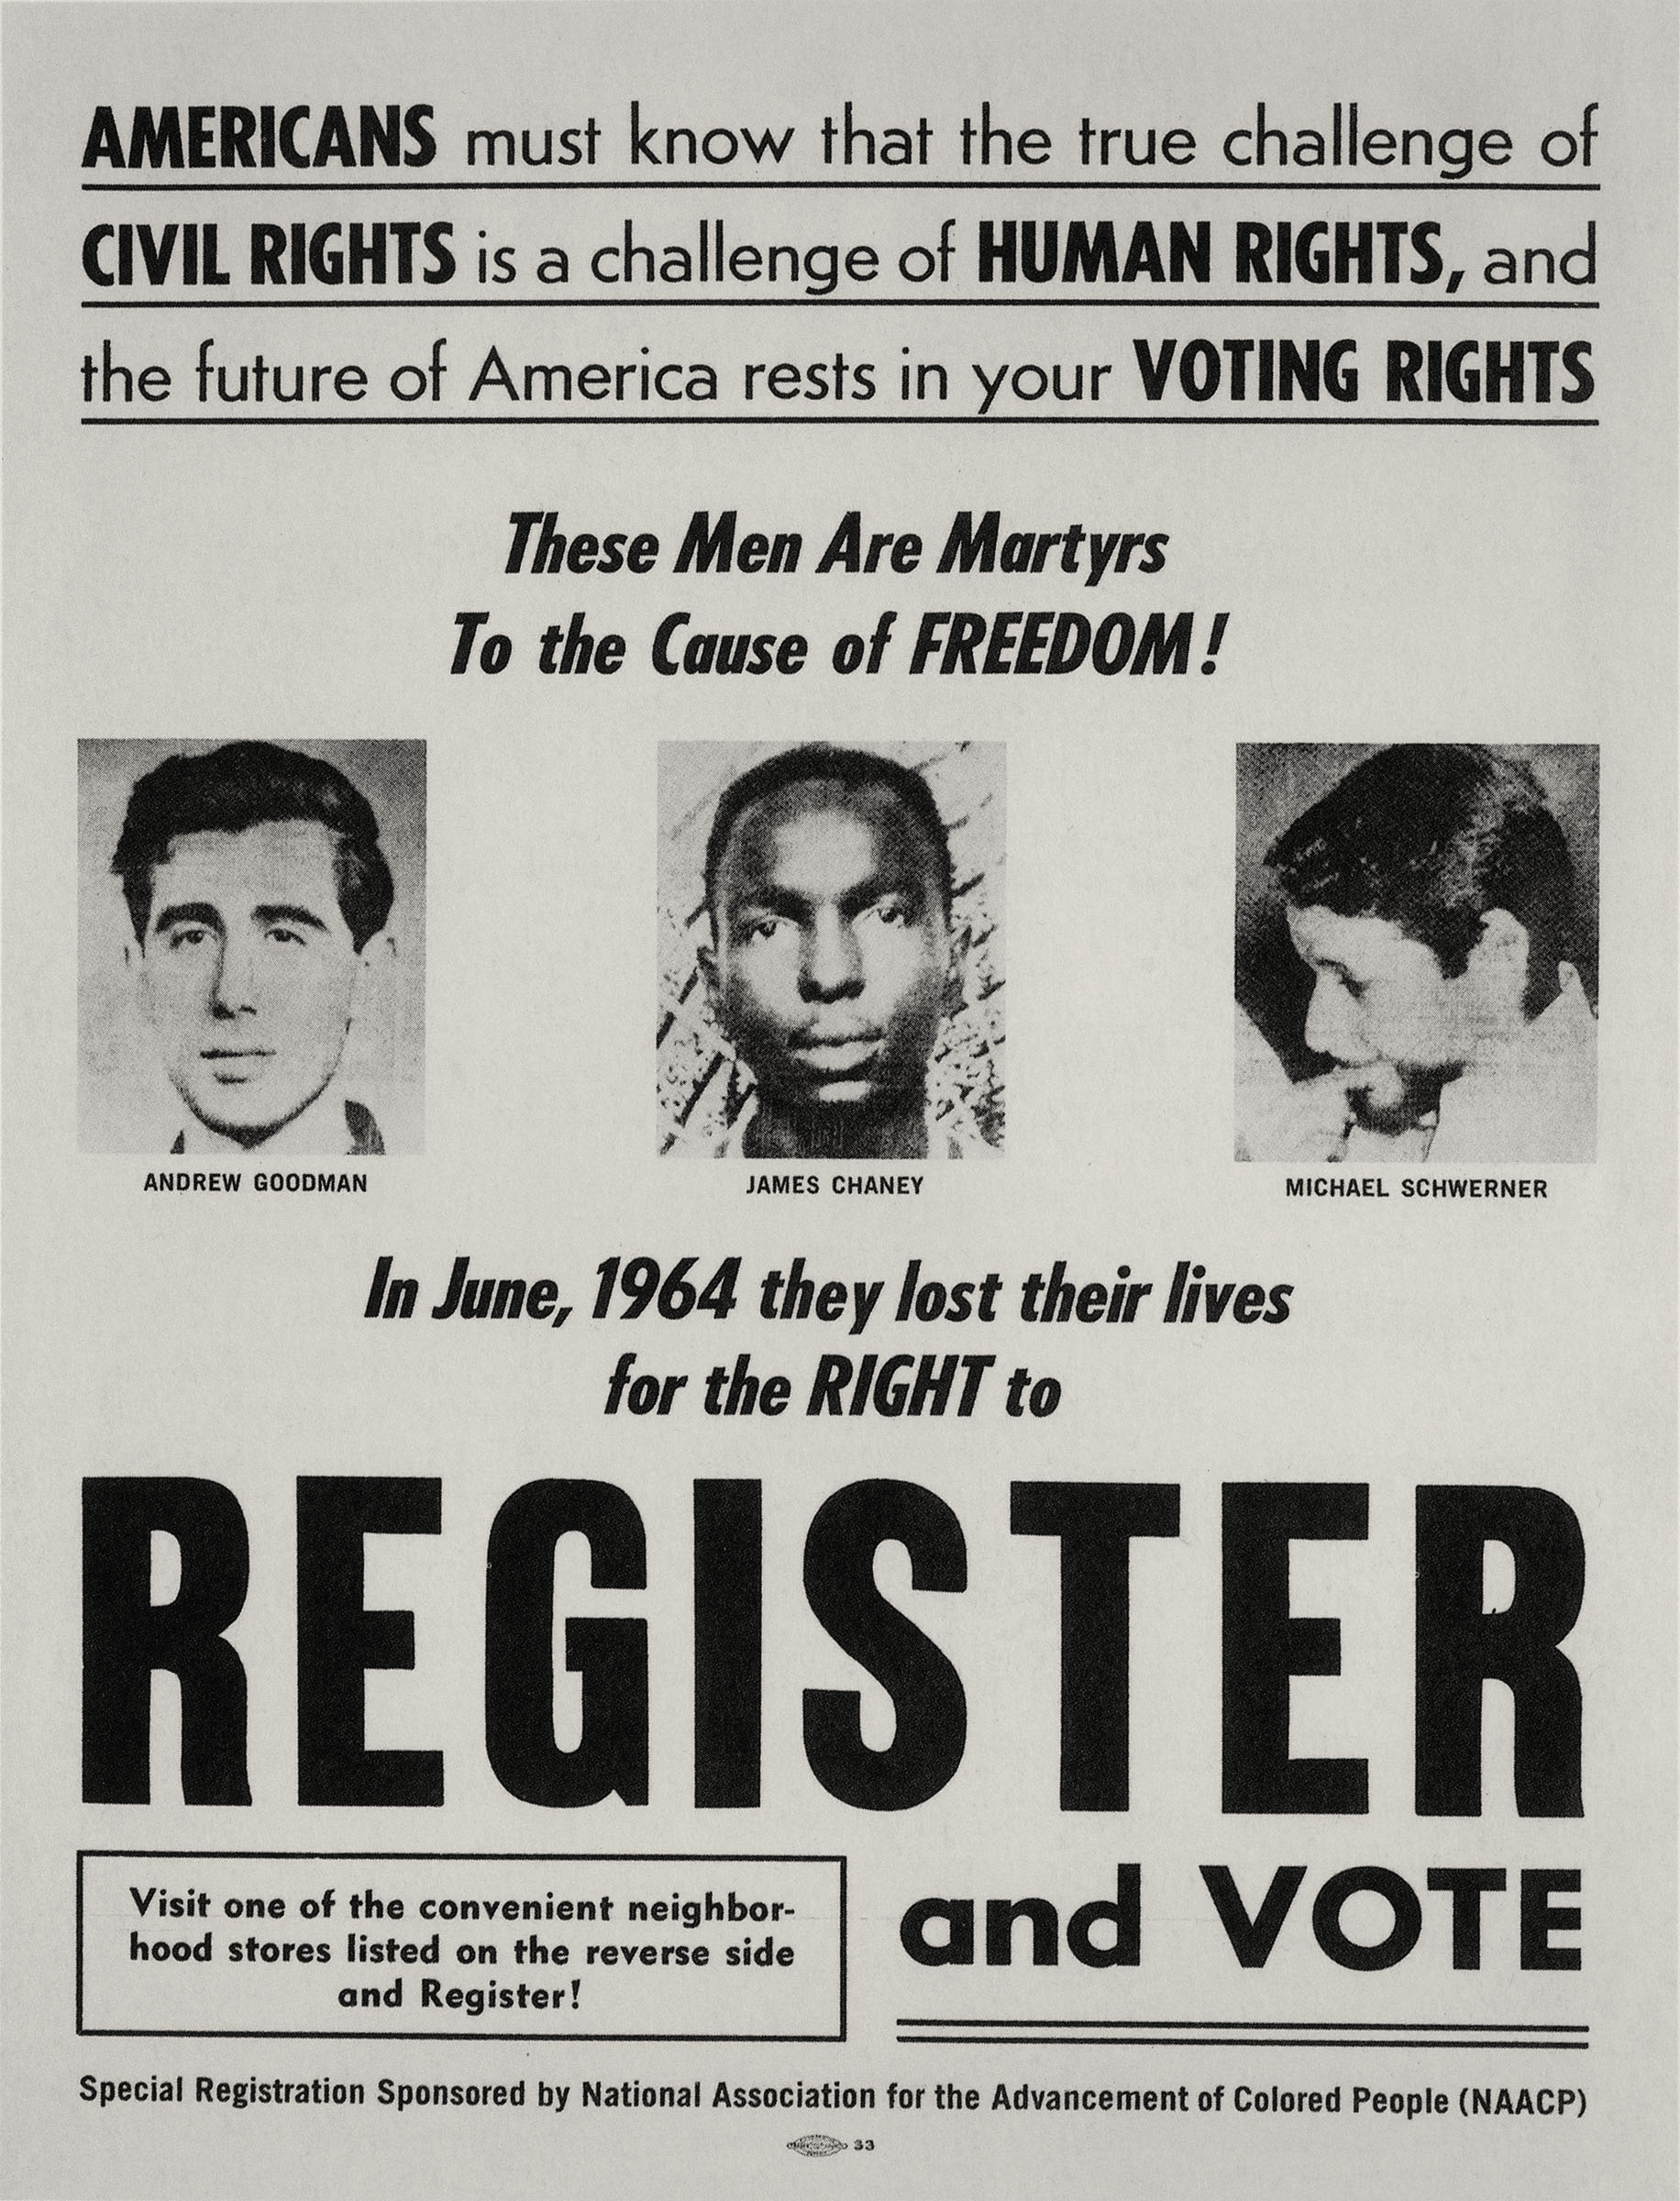 Register and Vote, 1964. Photograph by Steve Schapiro. Poster encouraging people to register and vote featuring the images of James Chaney, Andrew Goodman, and Michael Schwerner as martyrs for freedom. Photograph in the collection of Miami University Art Museum, Oxford Ohio. Partial gift of the artist and partial purchase with contributions from the Kezur Endowment Fund (2019.23.17).